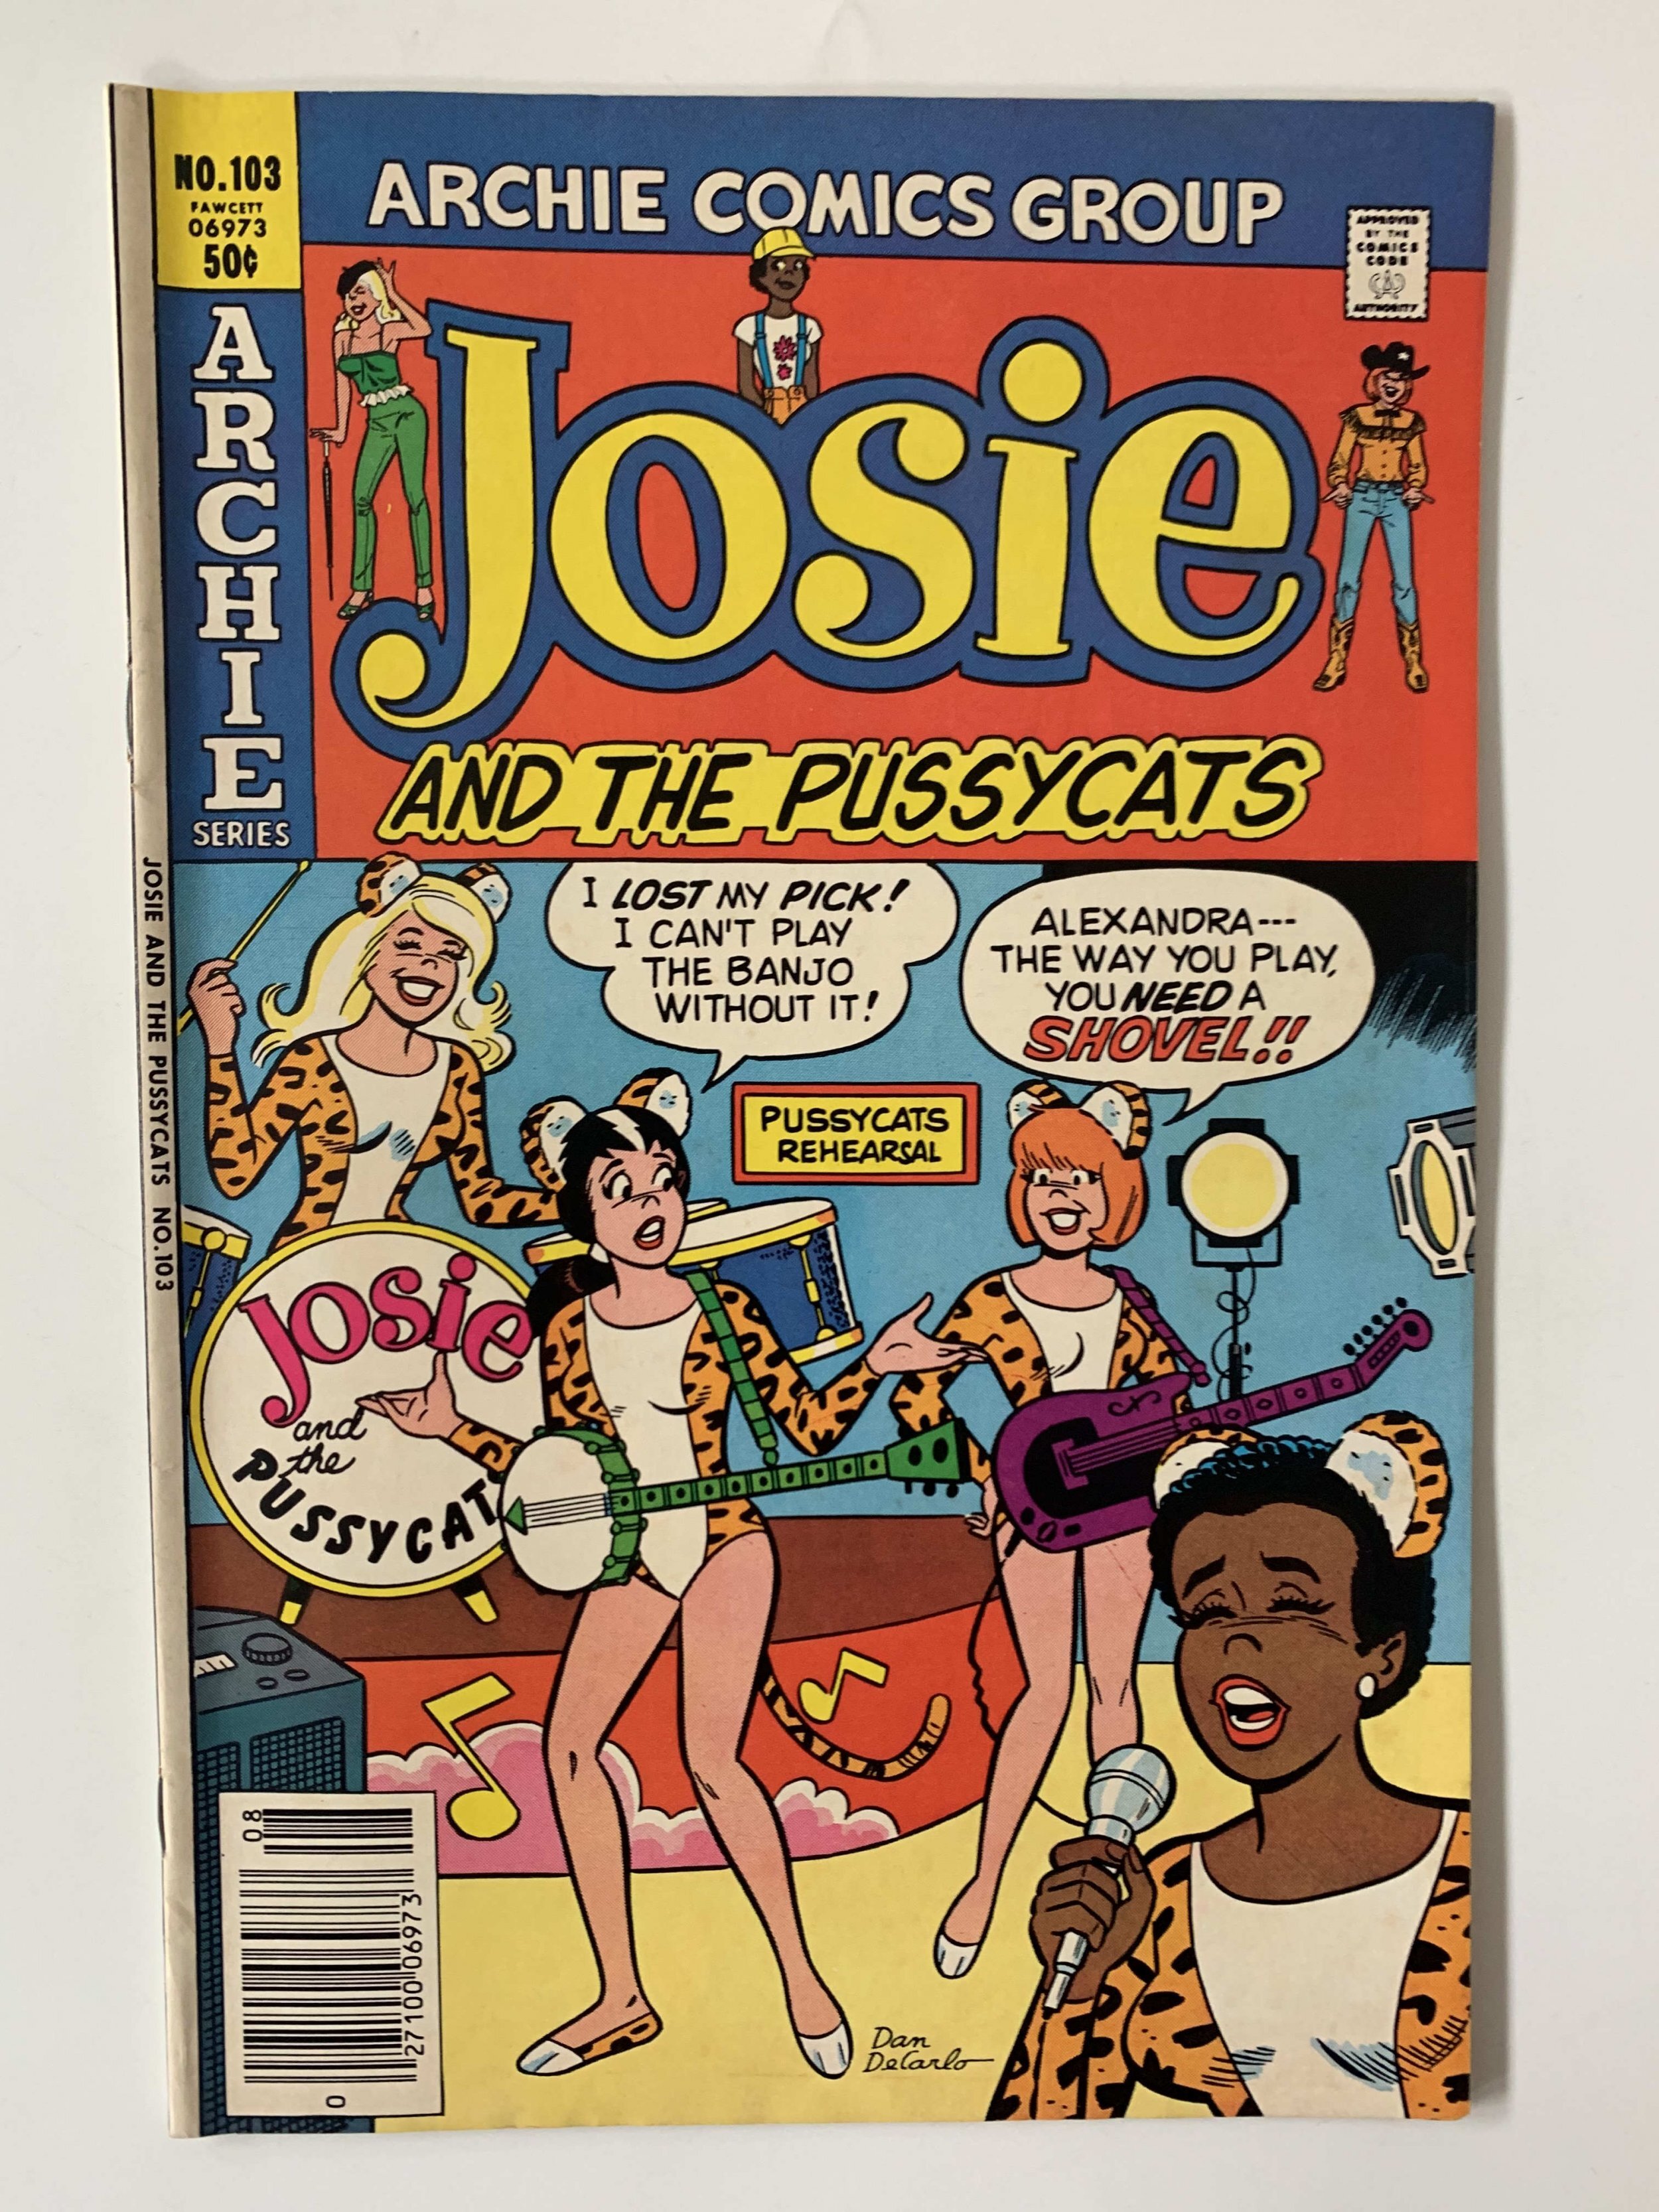 Josie and the Pussycats #103 (1981) | Comic Books - Bronze Age, Archie  Comics, Cartoon Character / HipComic